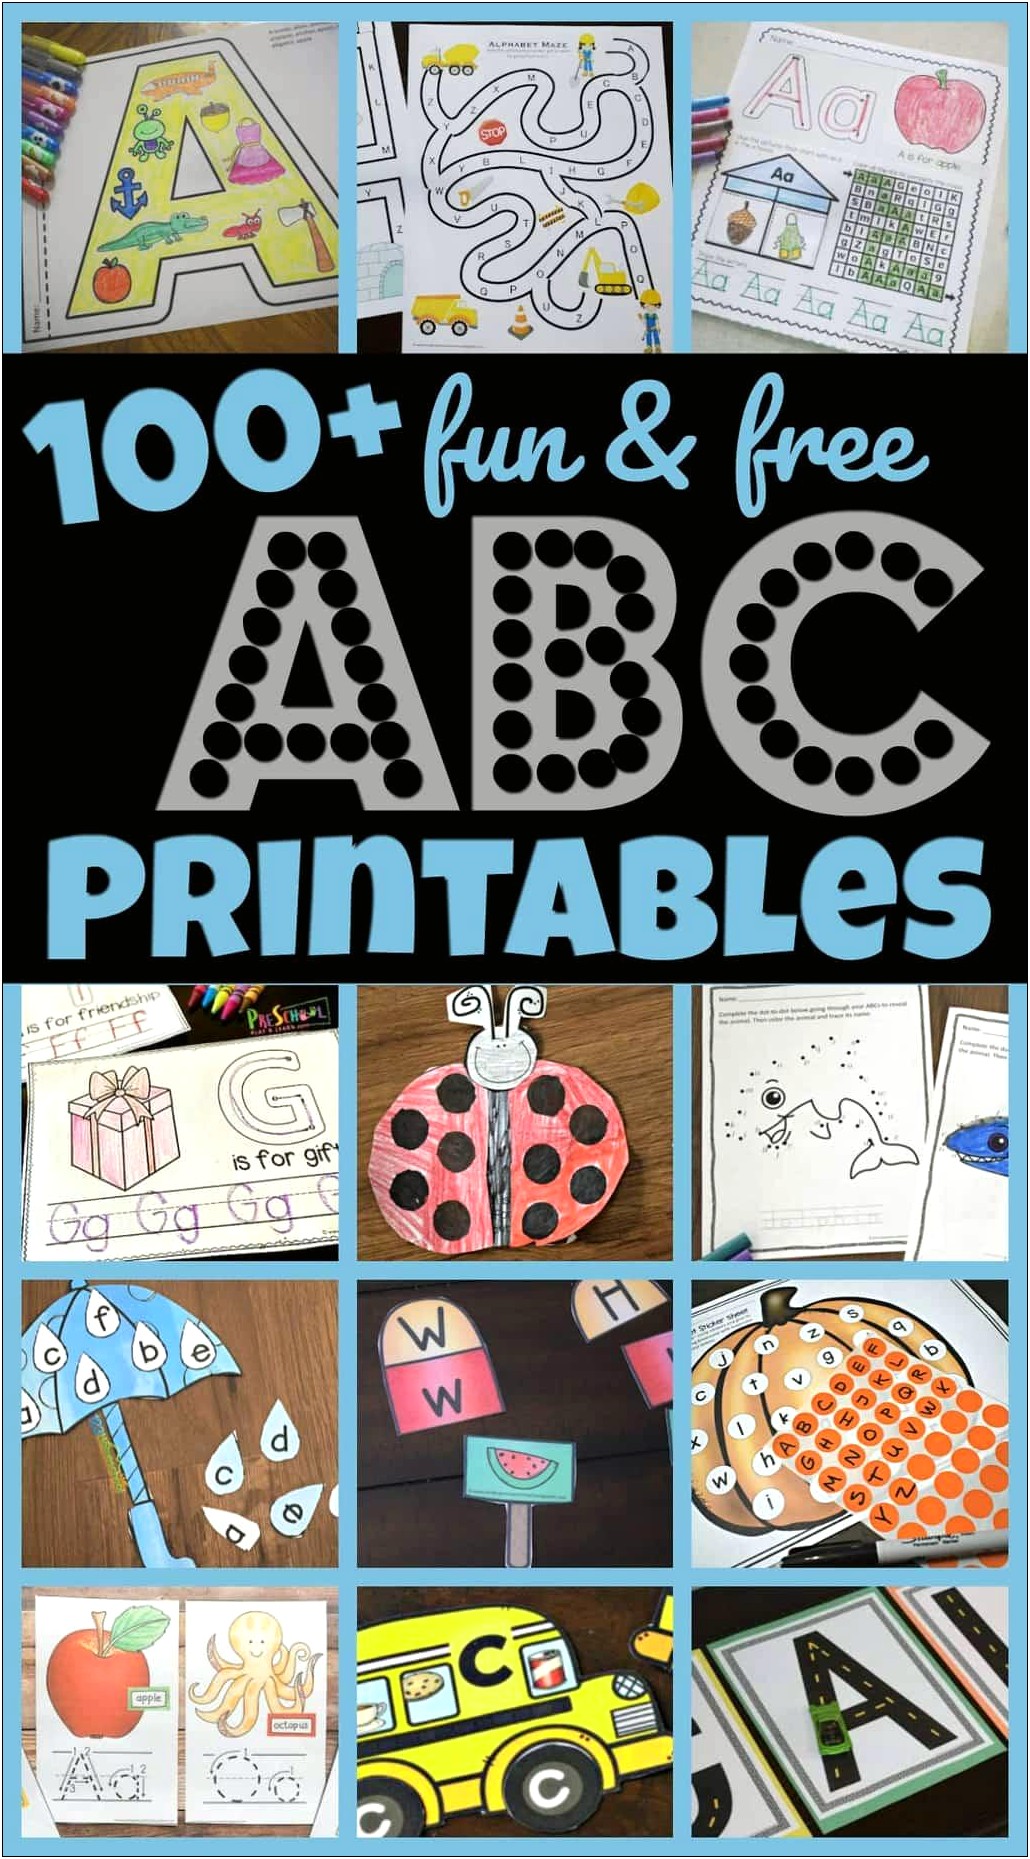 Alphabet Letters Writing Worksheets Free Template